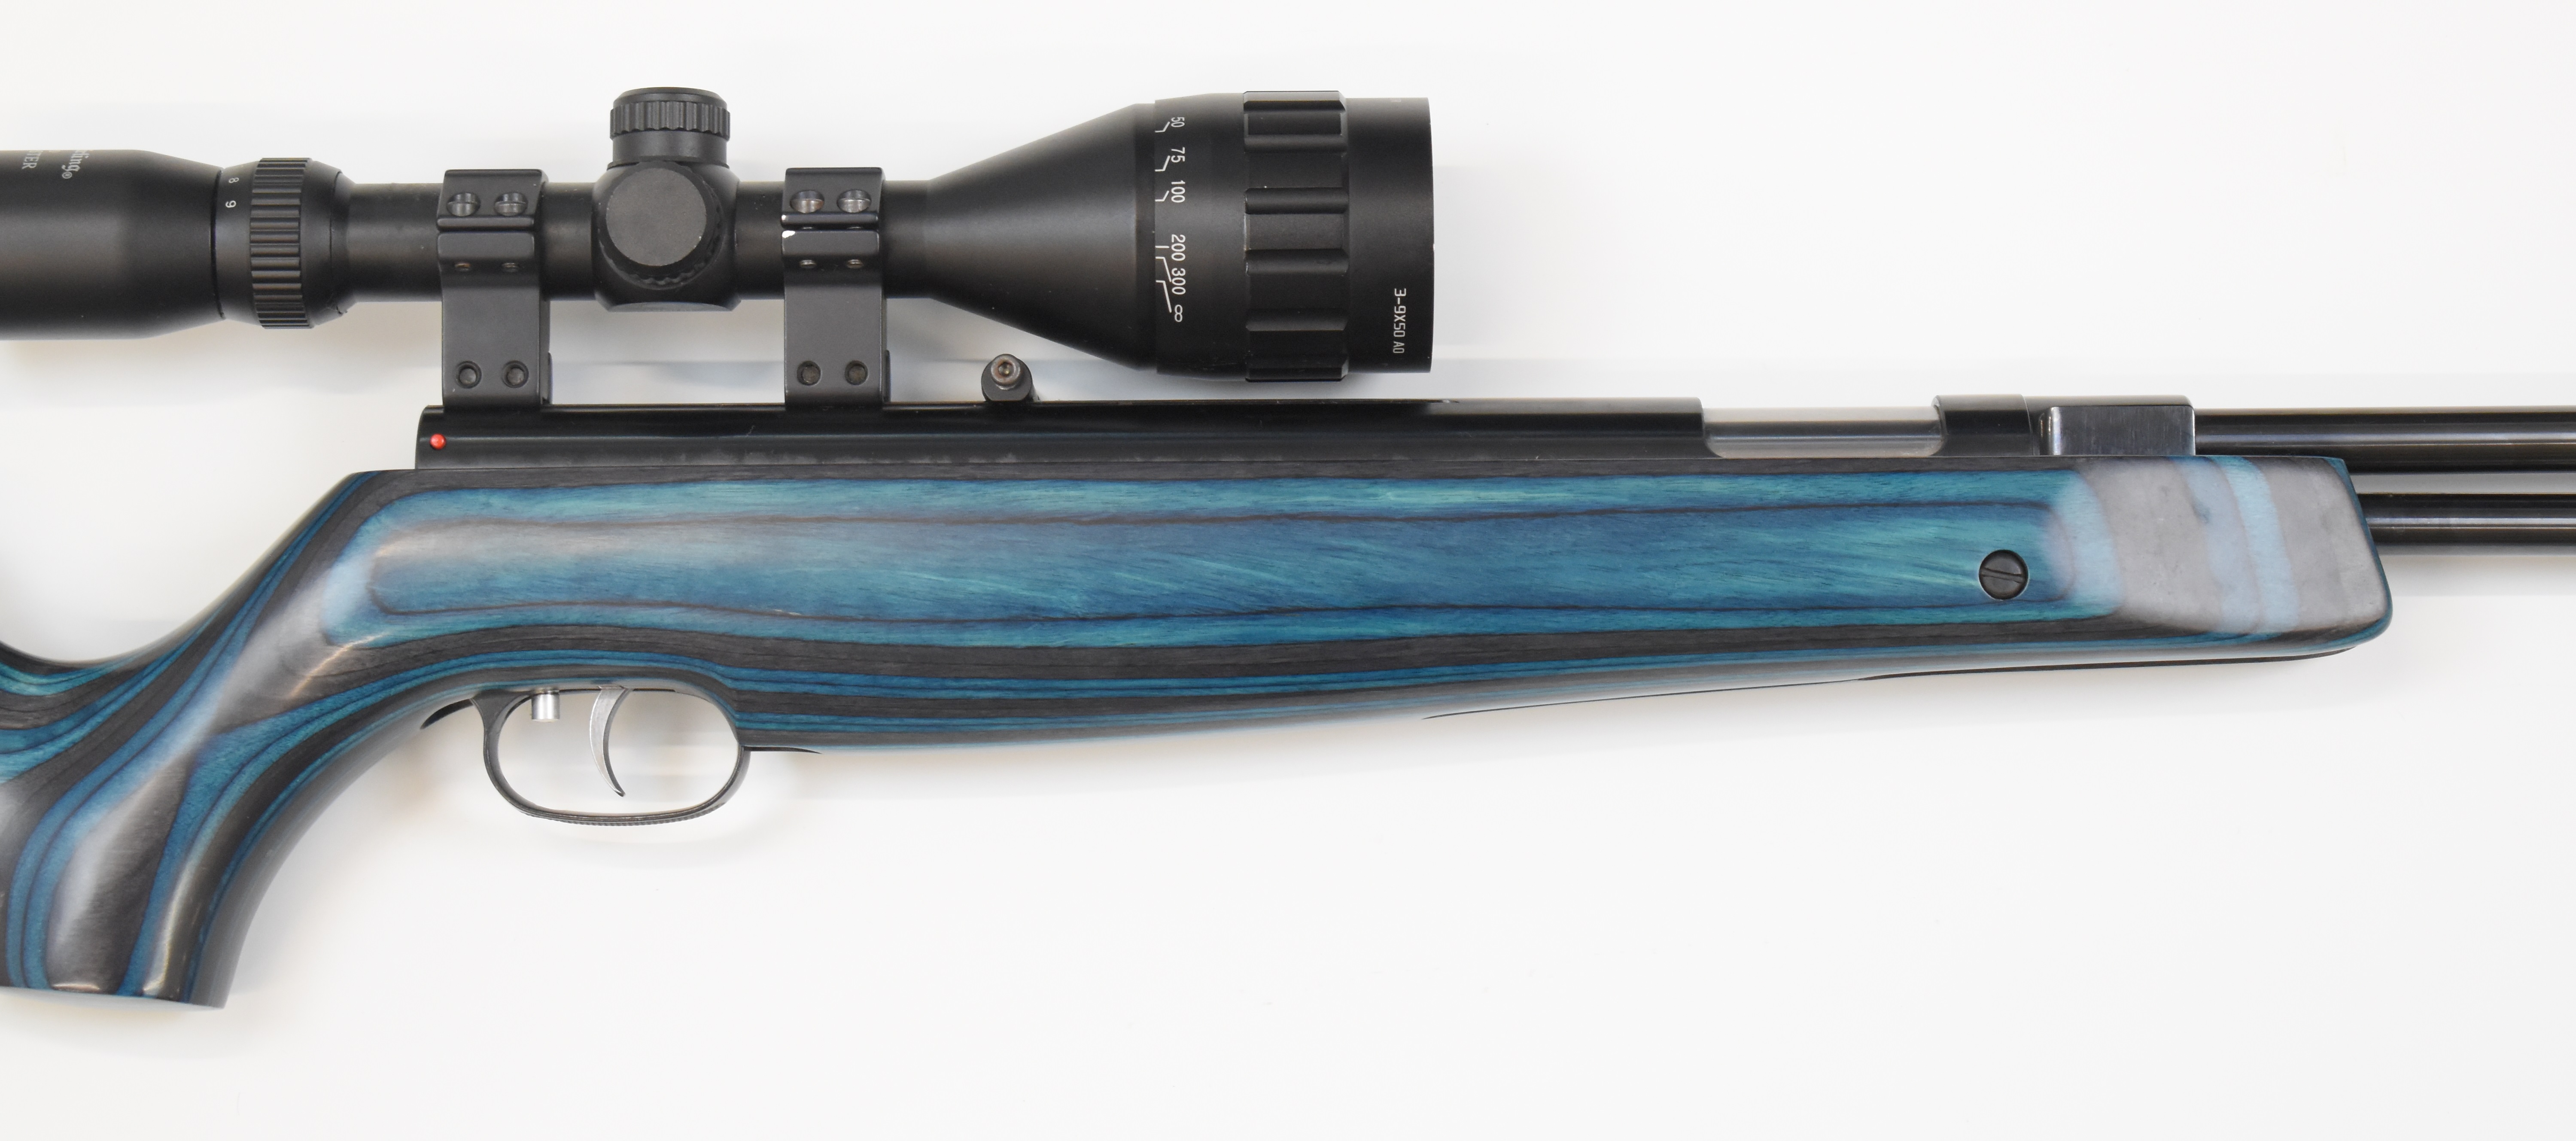 Weihrauch HW97K .22 underlever air rifle with blue laminated show wood stock, semi-pistol grip, - Image 4 of 10